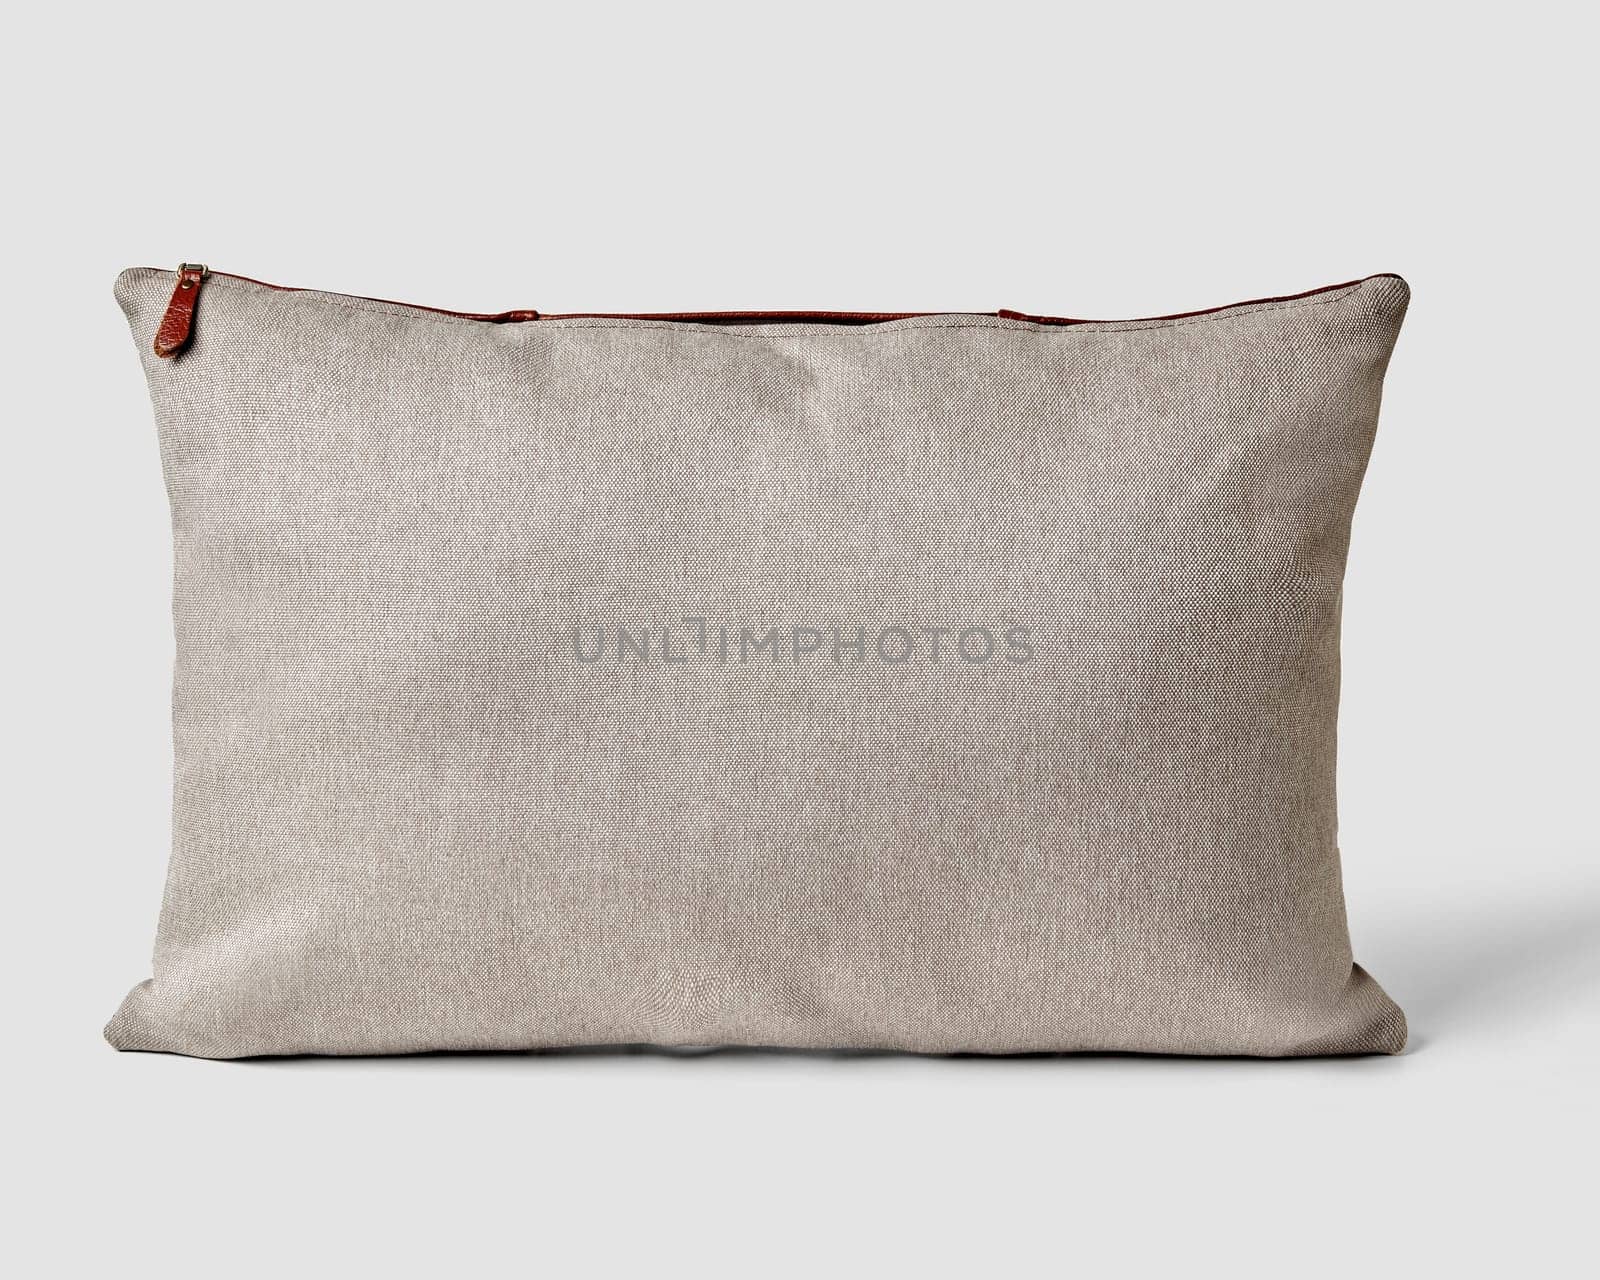 Natural textured grey fabric pillow with contrasting leather zipper by nazarovsergey